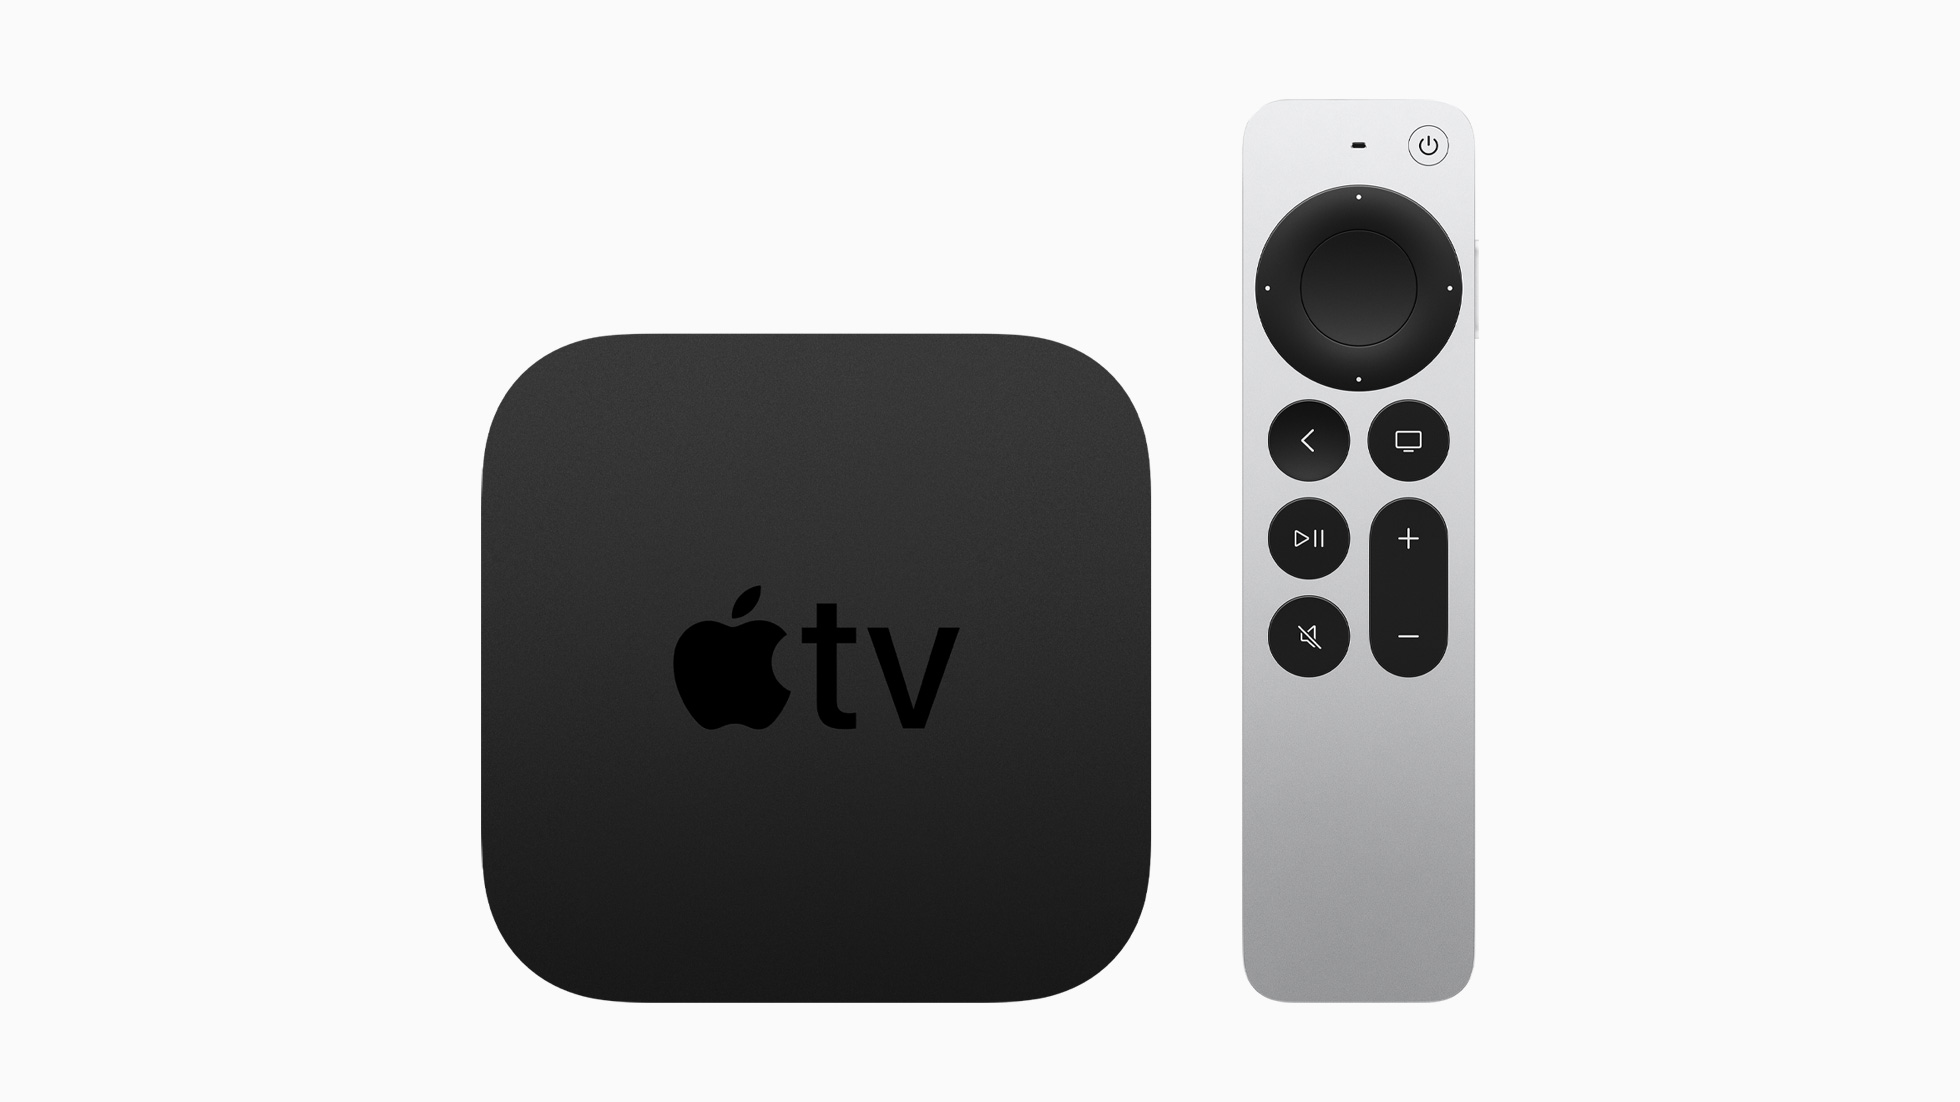 Apple announces Apple TV 4K and it gets a 120 Hz refresh rate - The